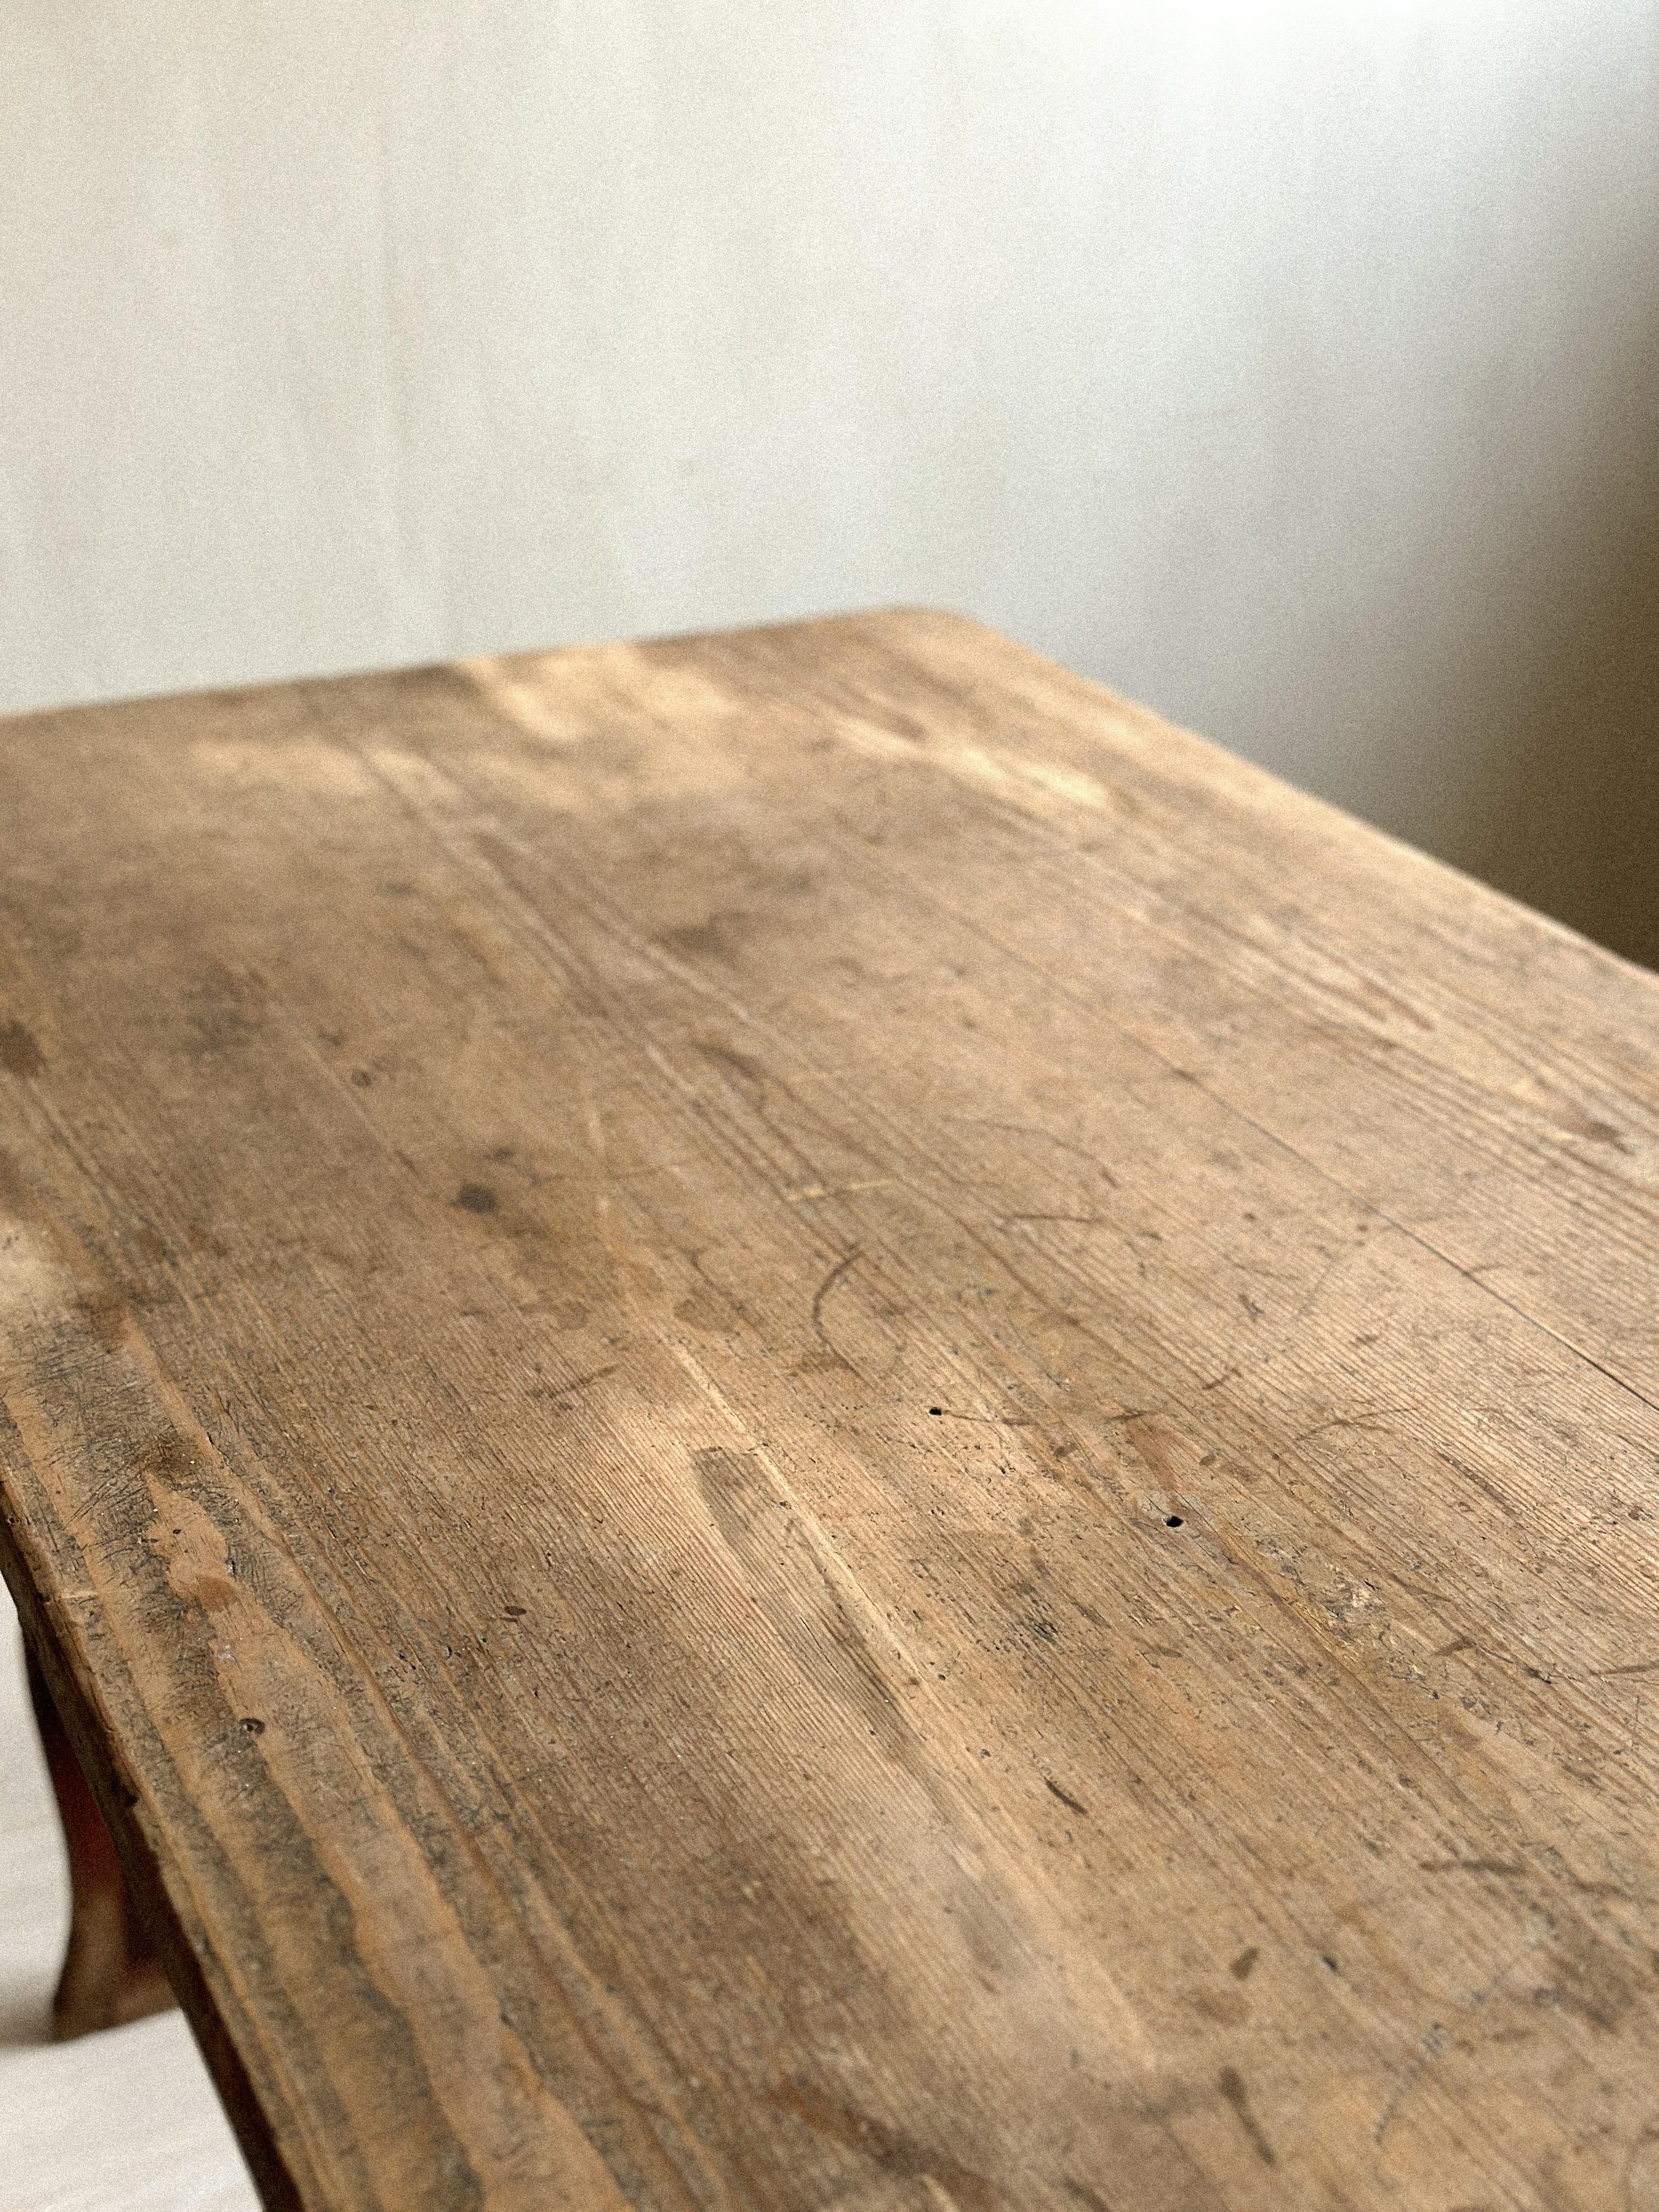 19th Century Antique Wabi Sabi Dining Table or Desk, Anonymous, Scandinavia c. 1800s  For Sale